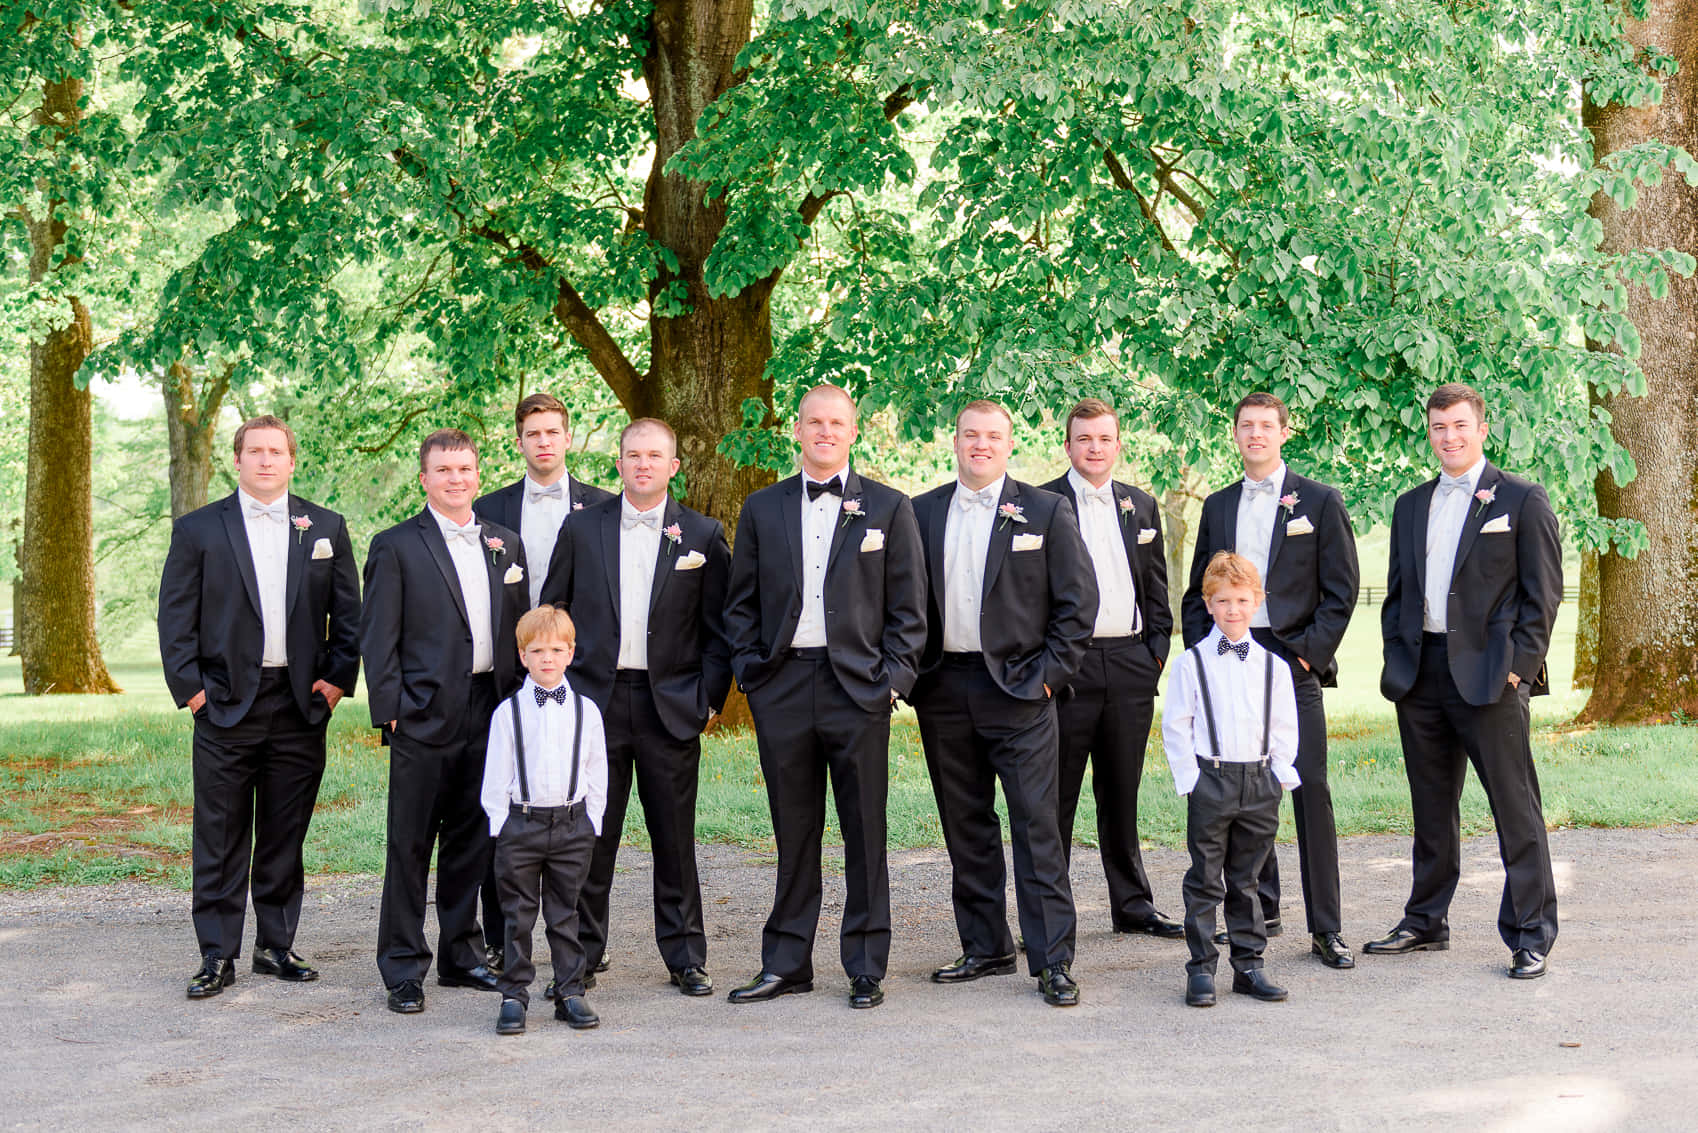 Special Day for the Groomsmen